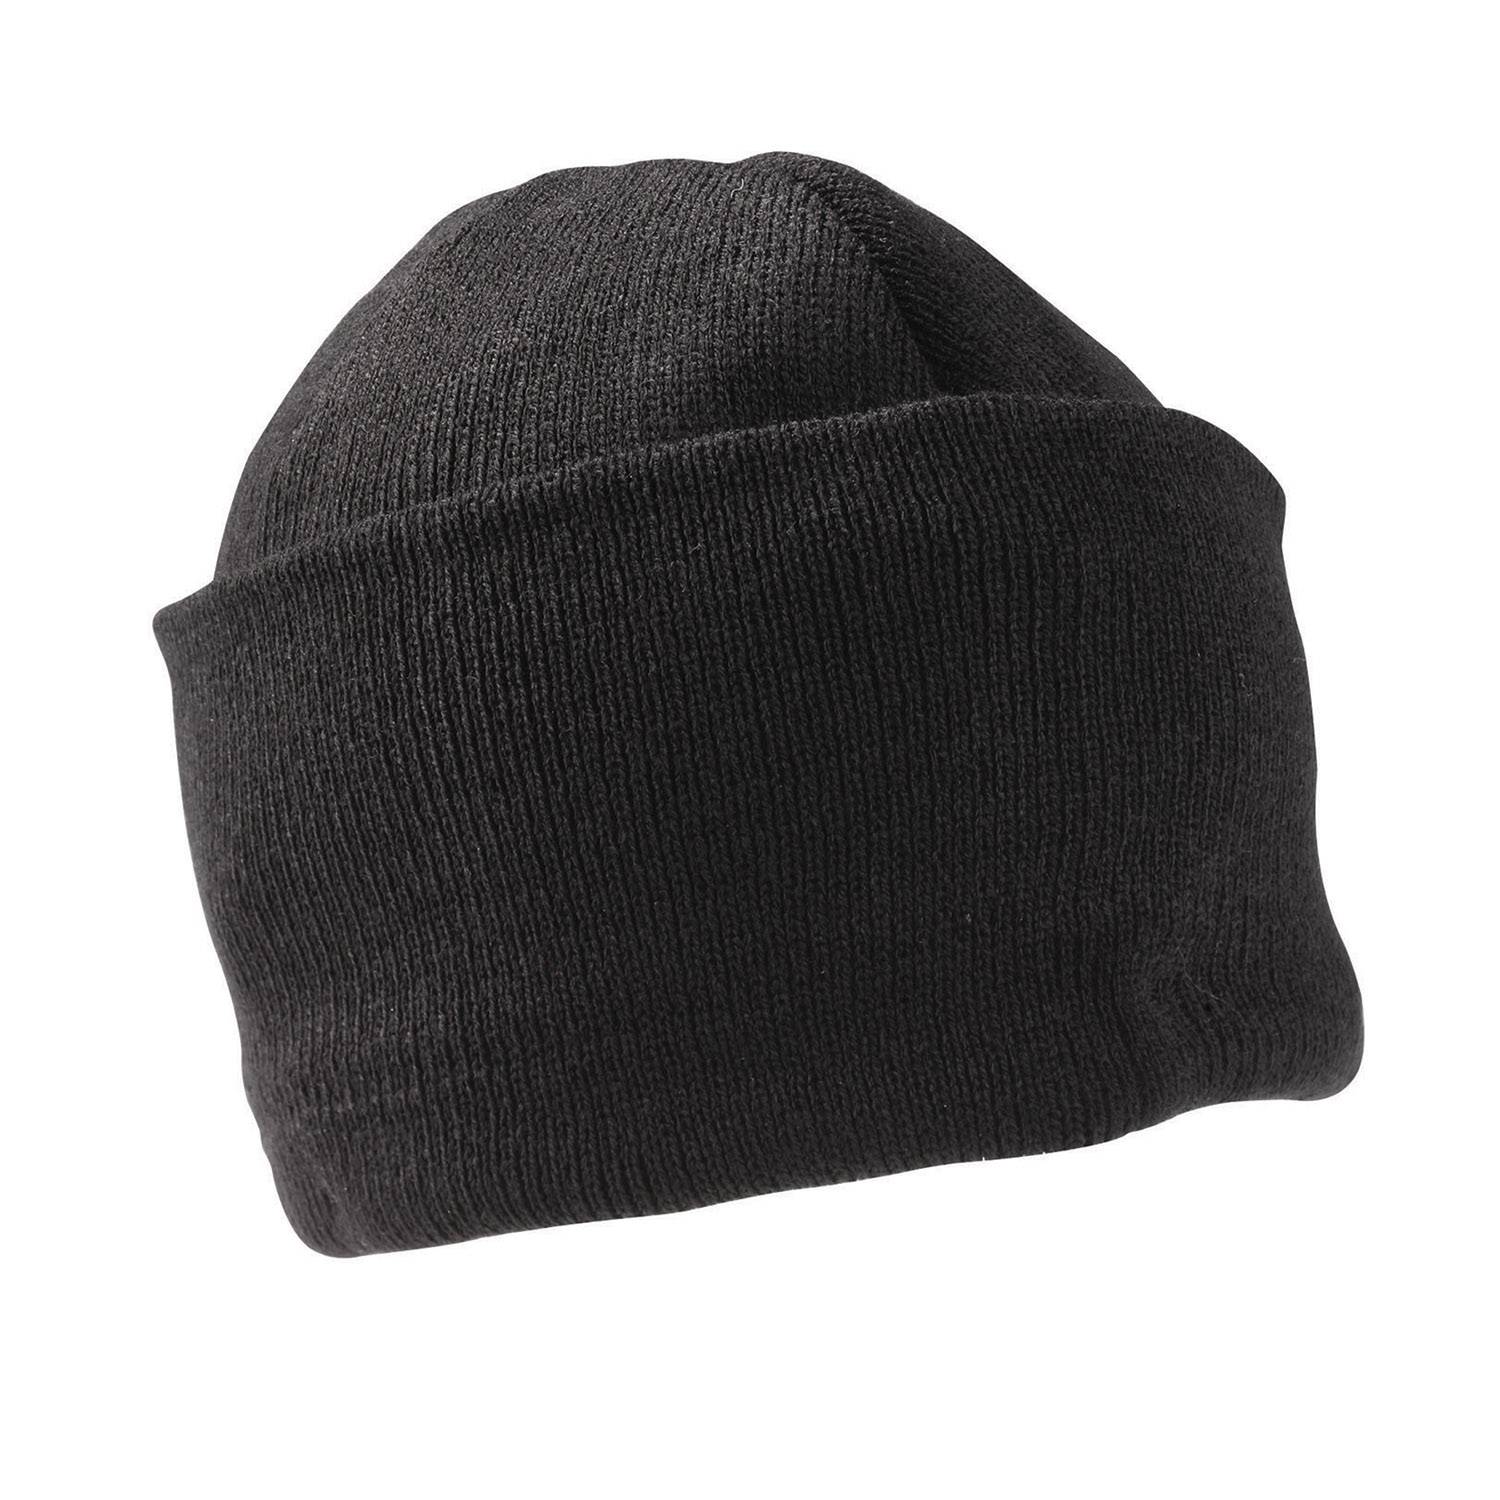 GALLS CLASSIC STYLE WATCH CAP WITH THINSULATE